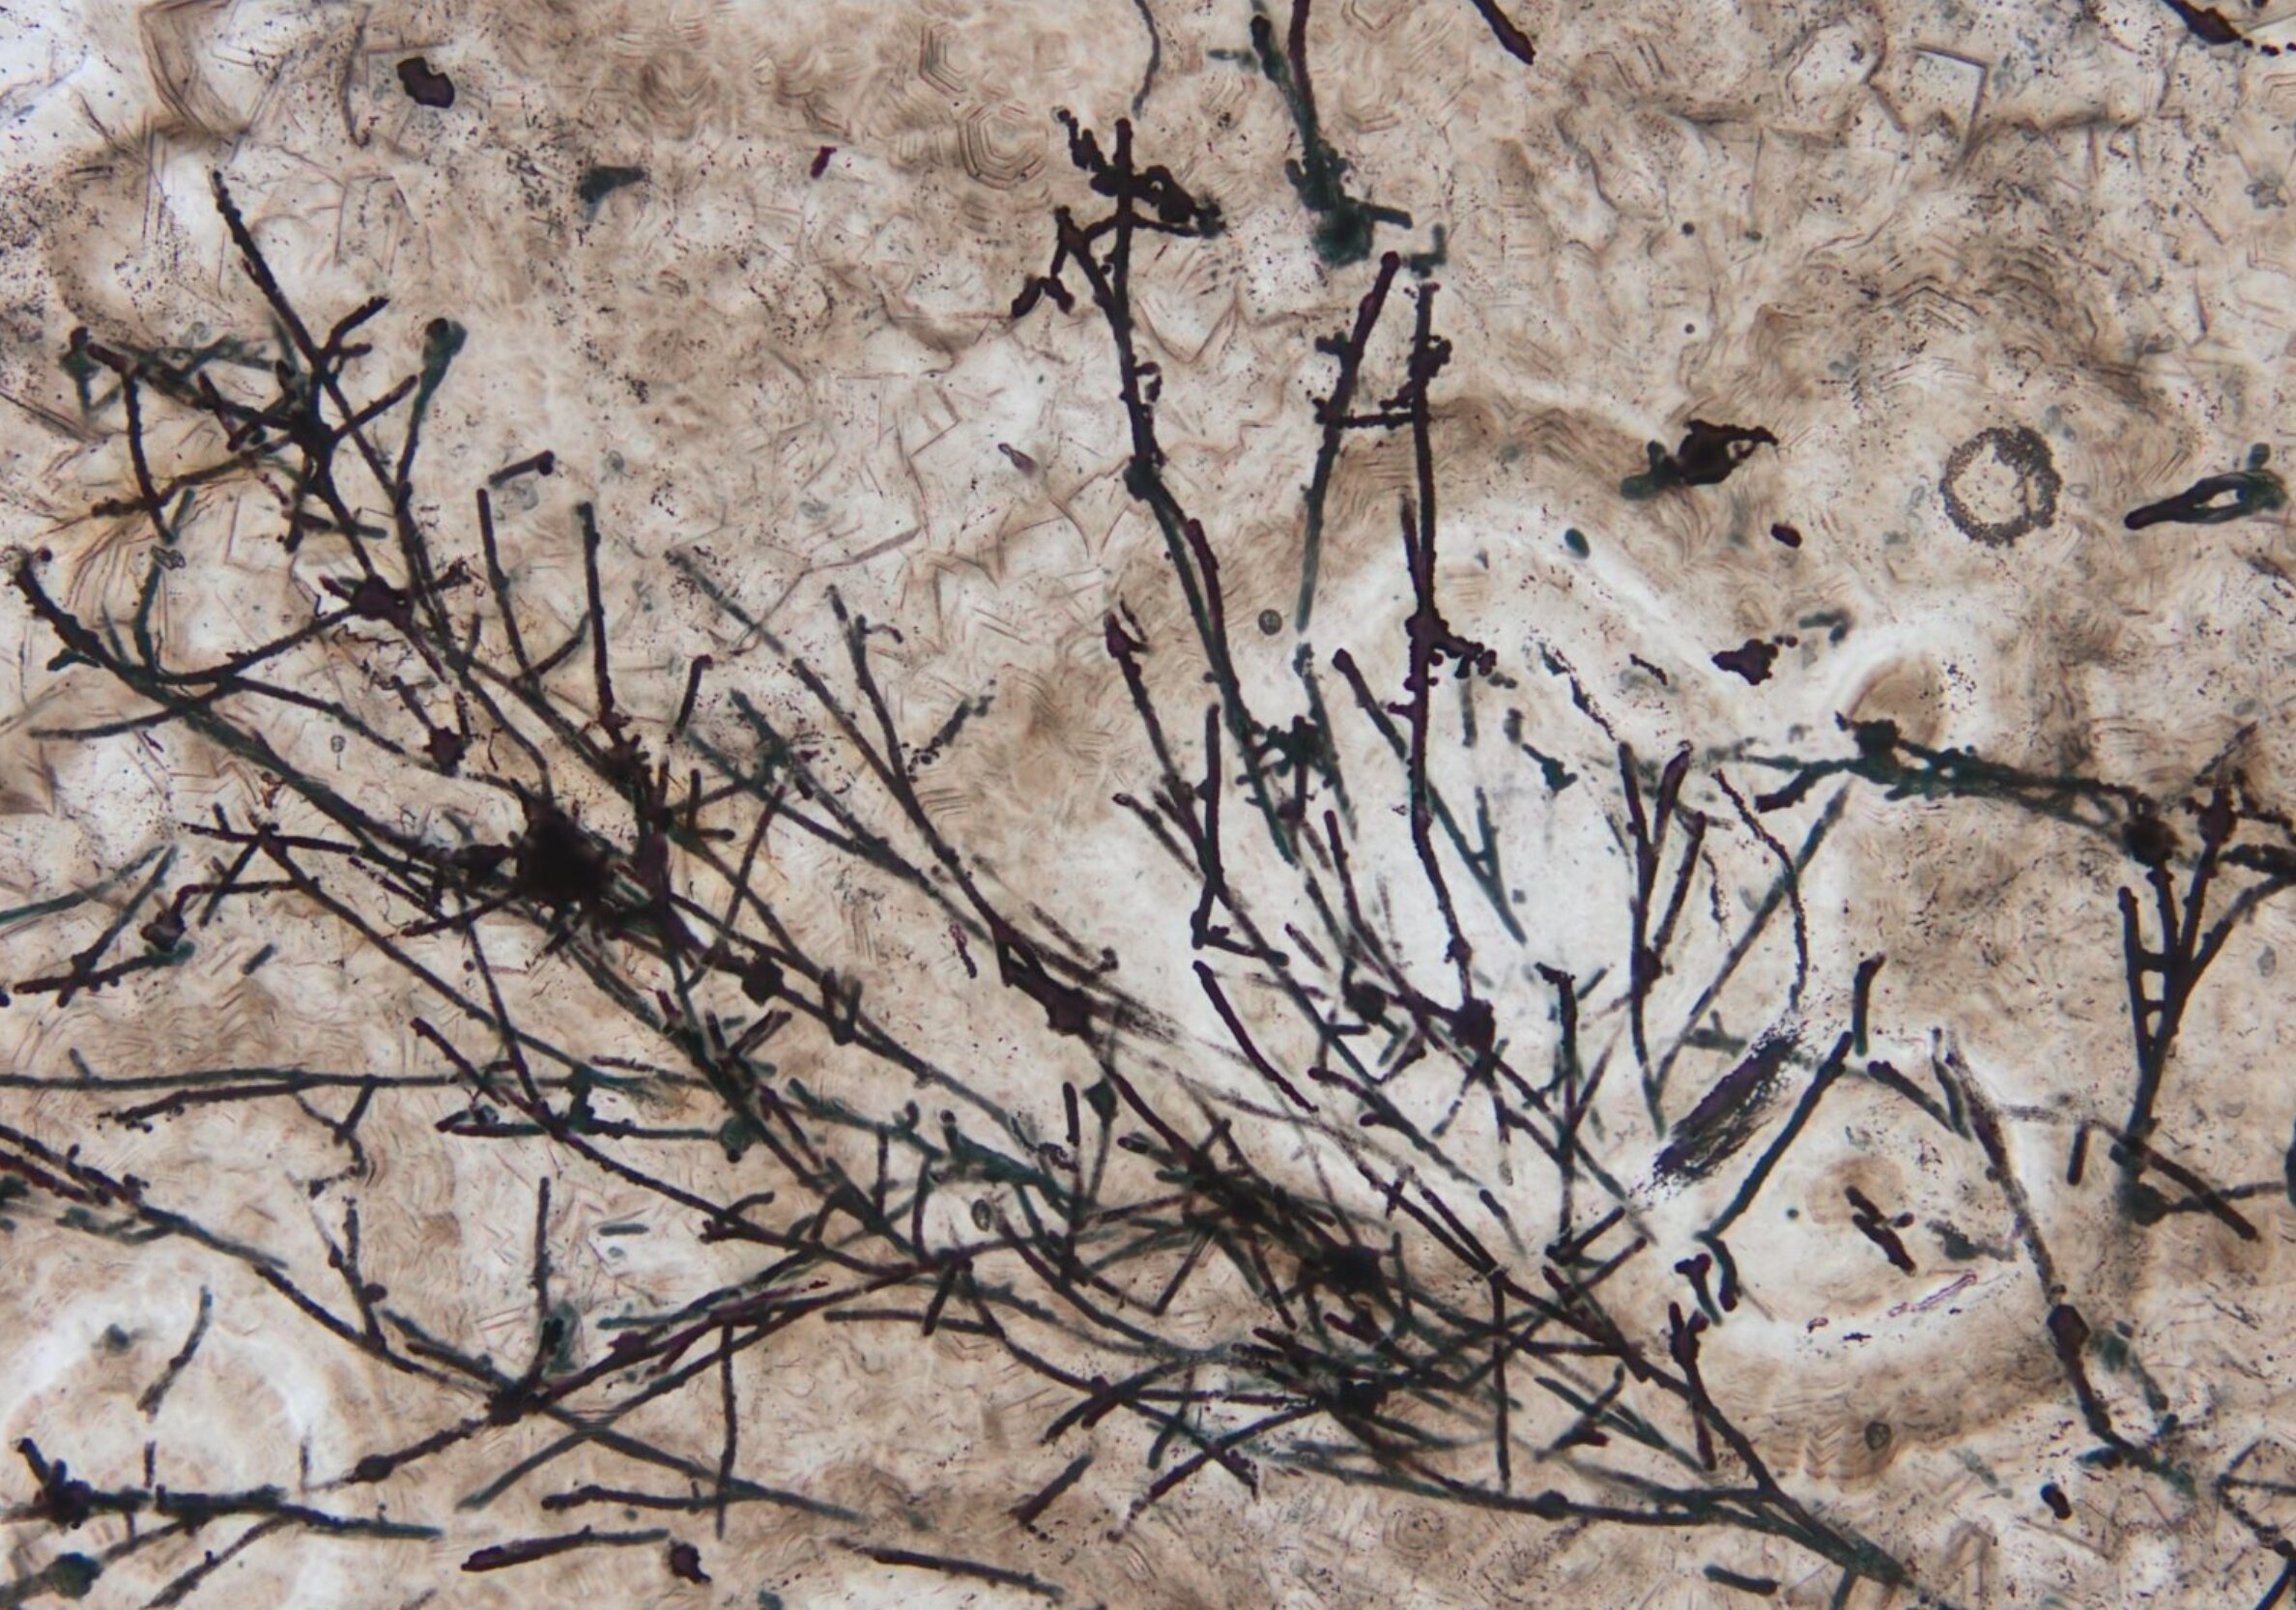 635 million year old fungal microfossils that saved us from the ice age have been discovered